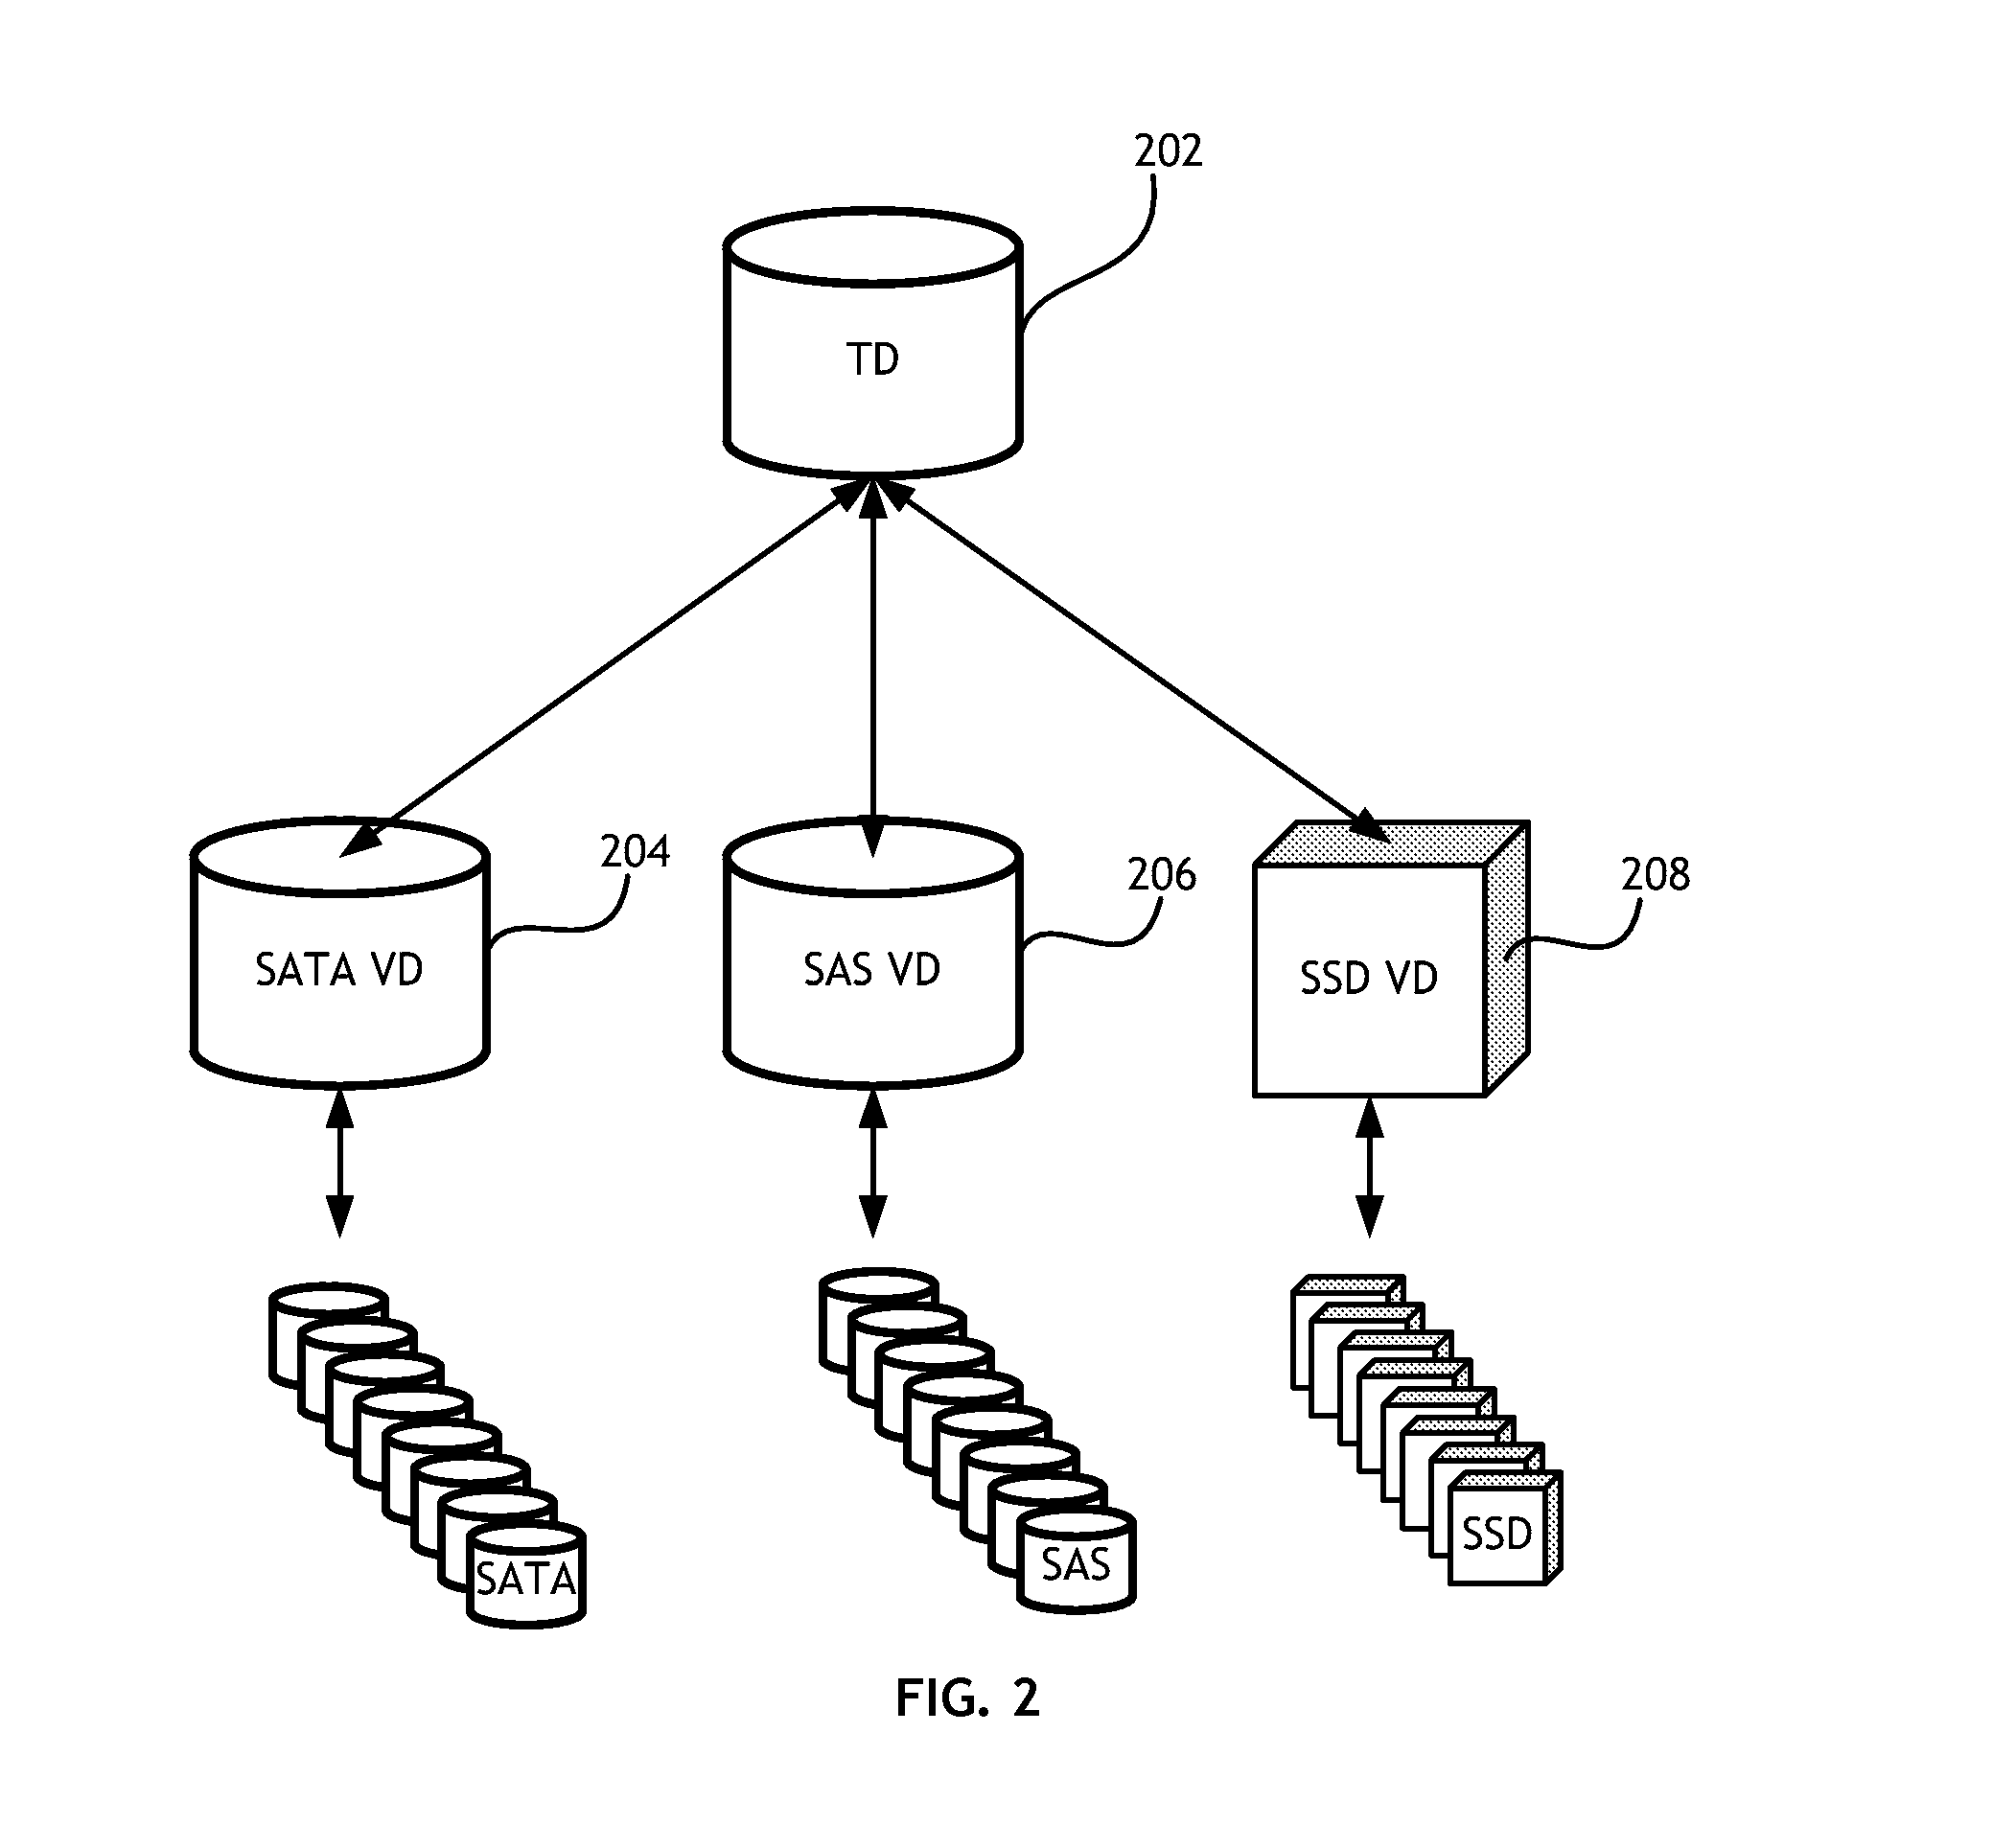 Apparatus to manage efficient data migration between tiers